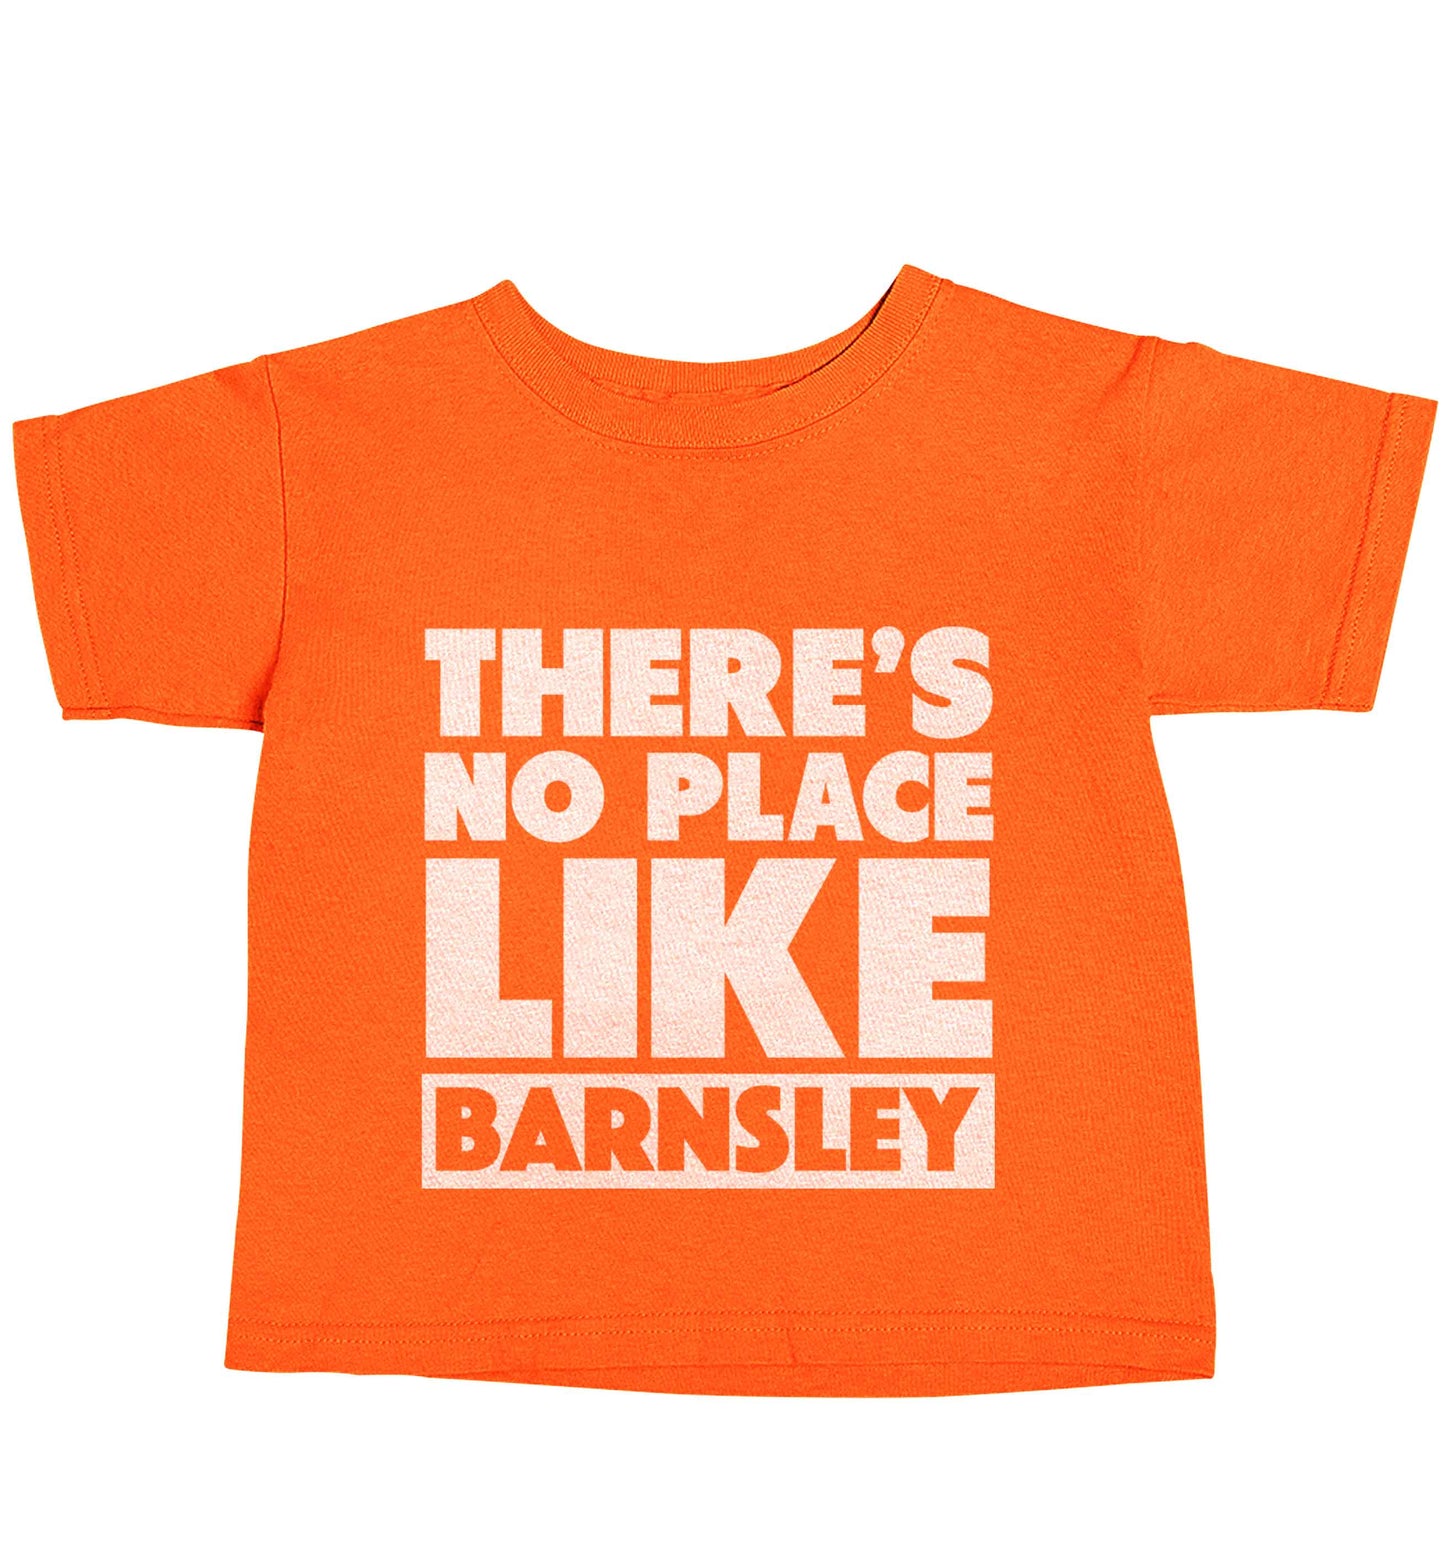 There's No Place Like Barnsley orange baby toddler Tshirt 2 Years